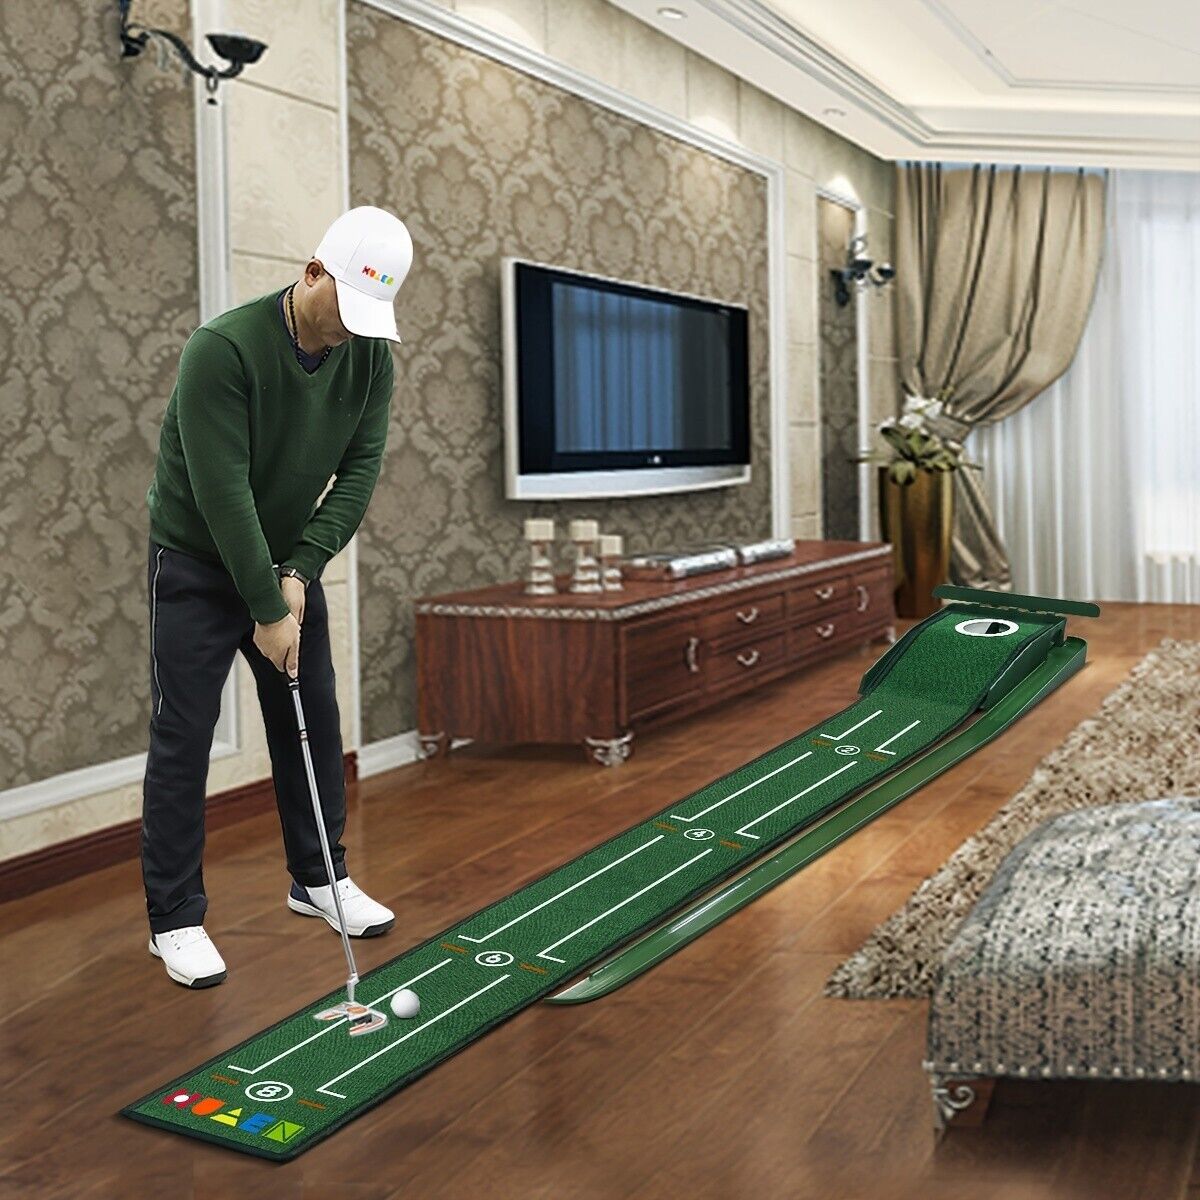 Portable Golf Putting Training Matt For Indoors And Outdoor, 8ft Putting Green